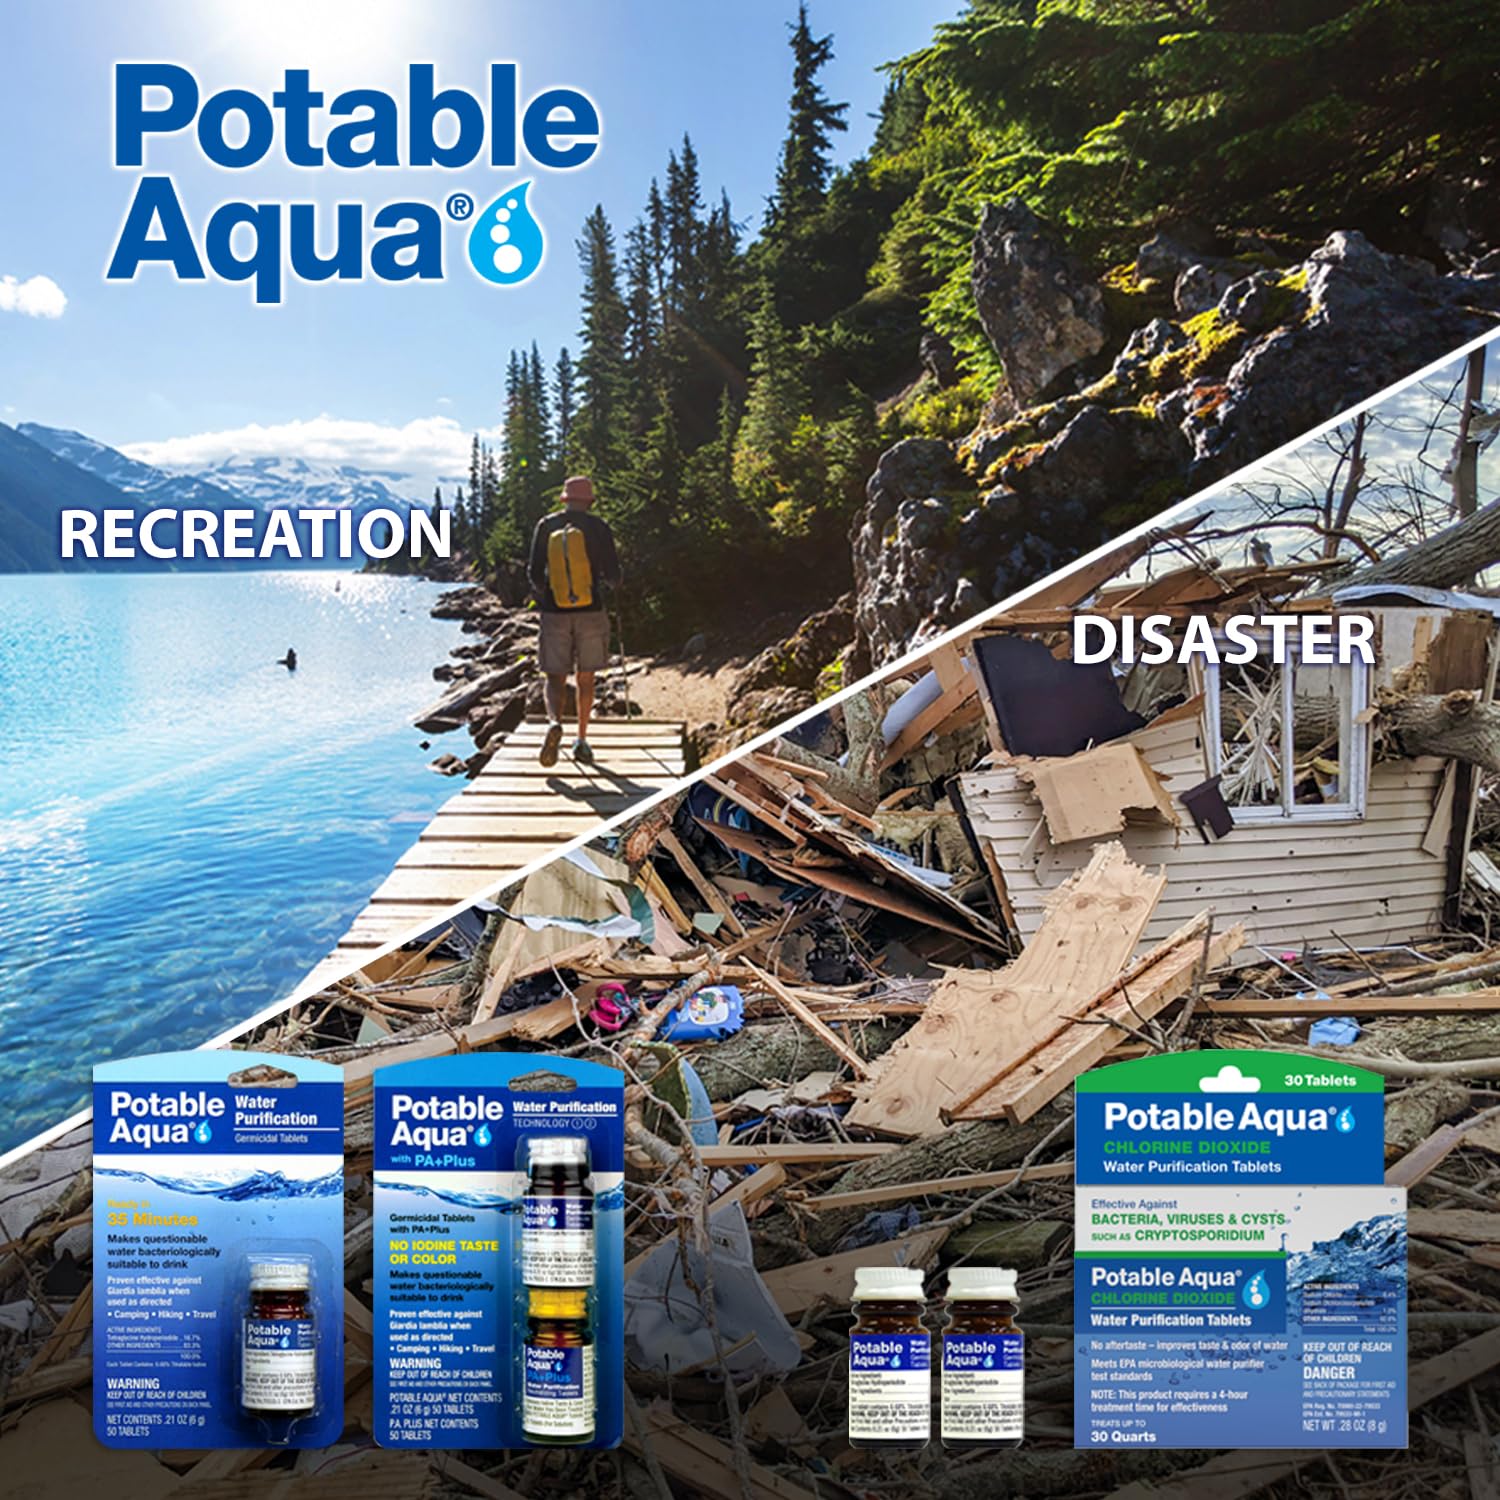 Potable Aqua Water Purification Tablets with PA Plus, Portable and Effective Water Purification Solution for Camping, Hiking, Emergencies, Natural Disasters and International Travel, Two 56ct Bottles